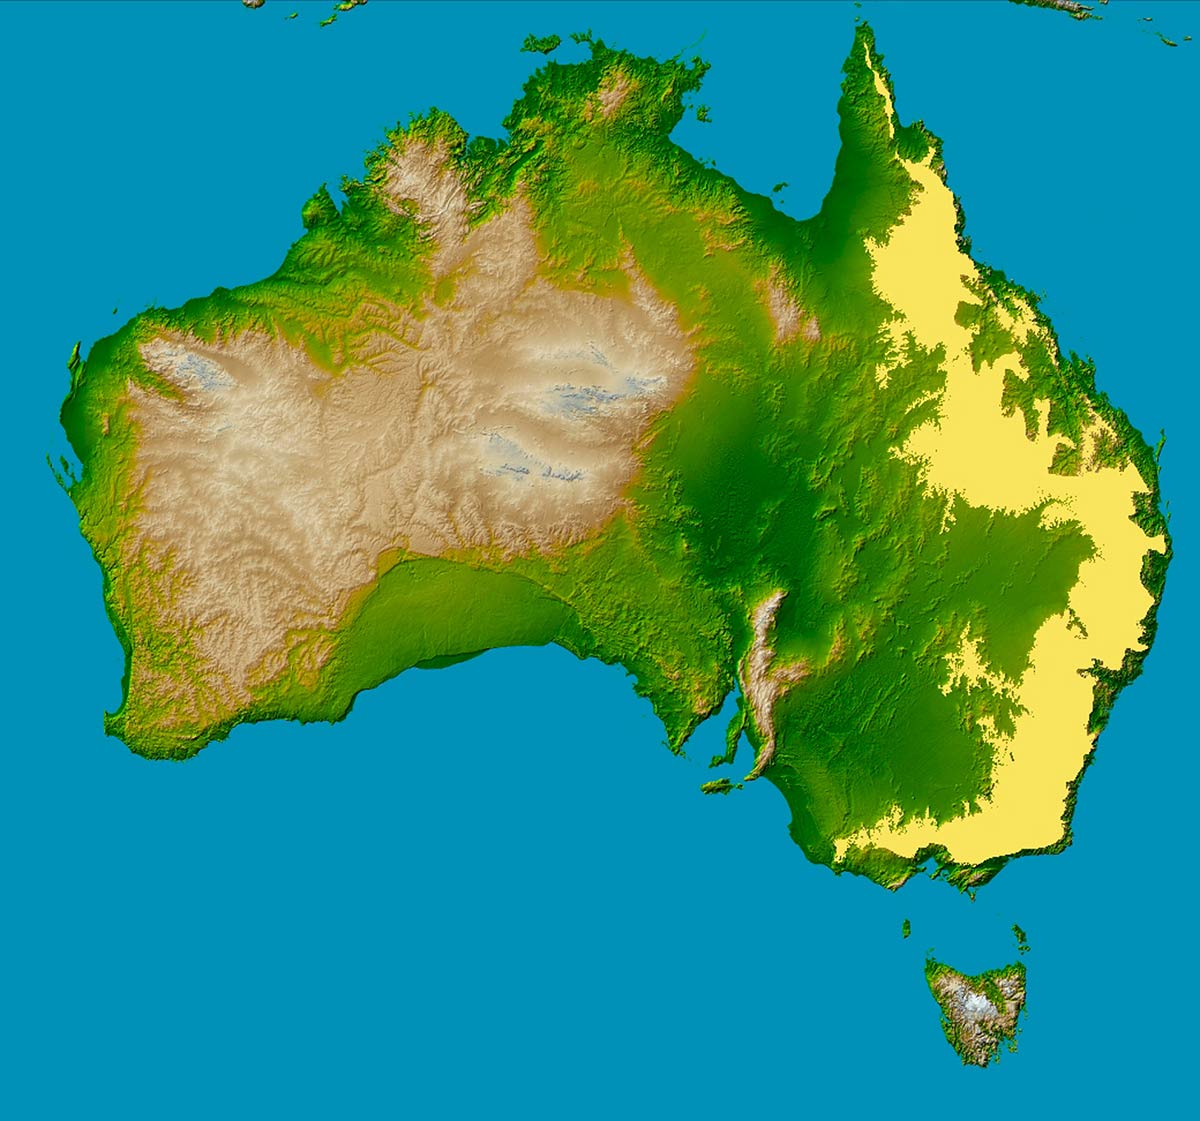 Map of Australian showing the Great Dividing Range highlighted in yellow.